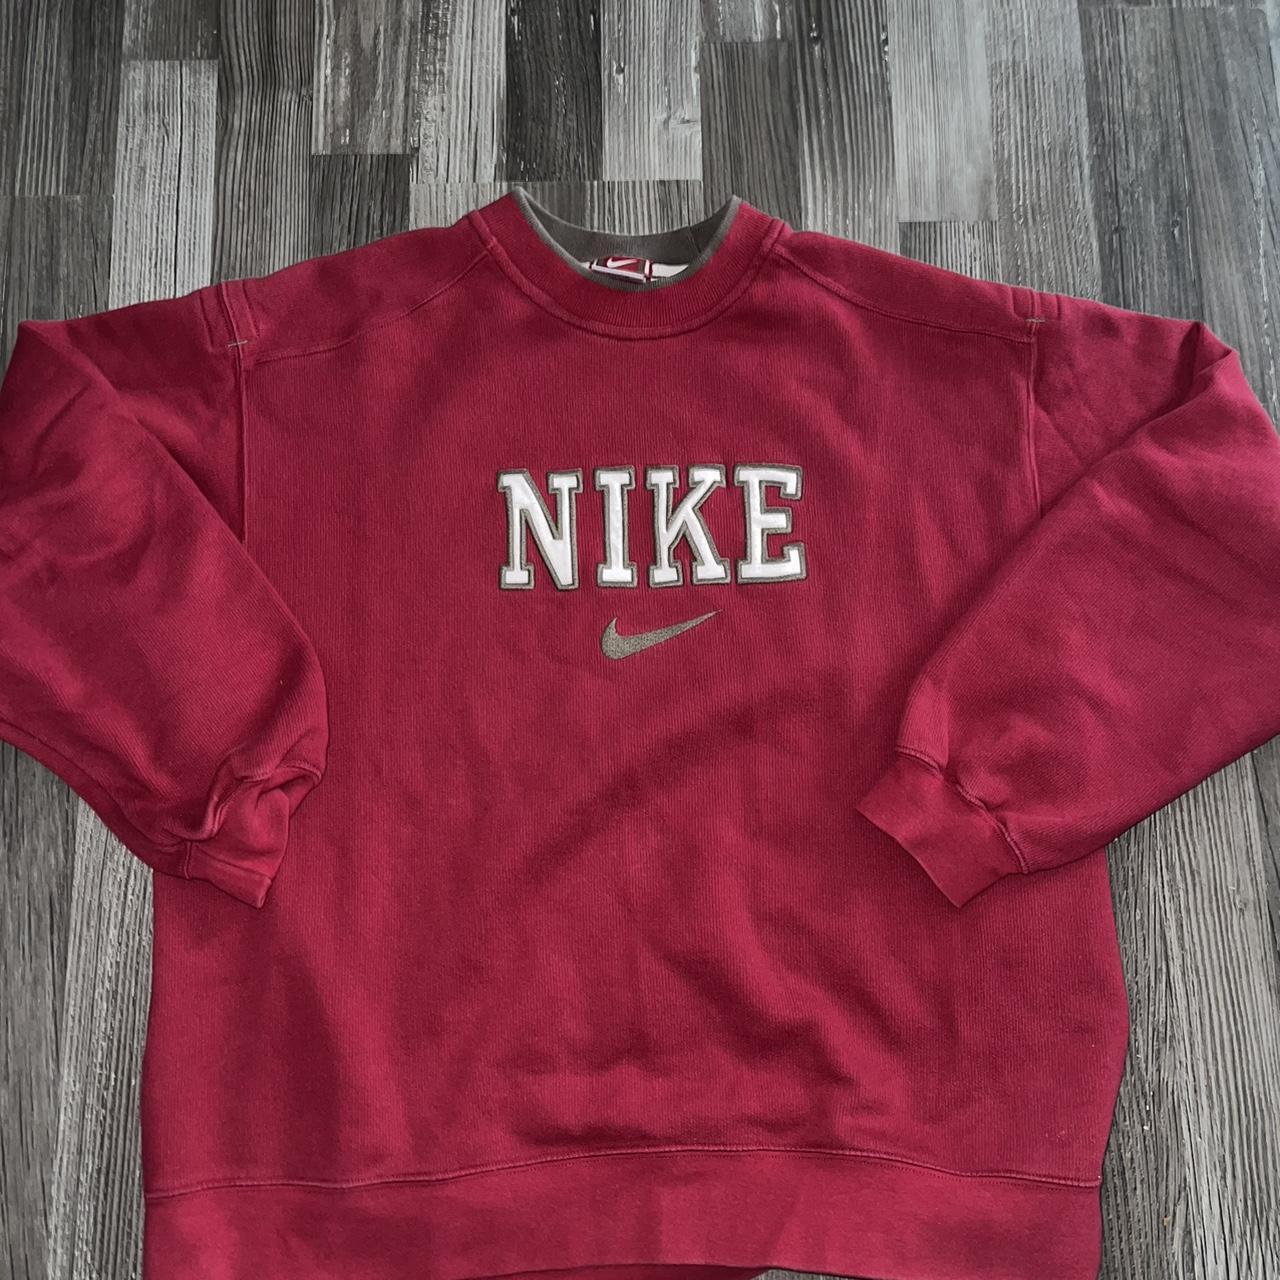 Nike air Swoosh Vintage spellout Pullover Size M... - Depop